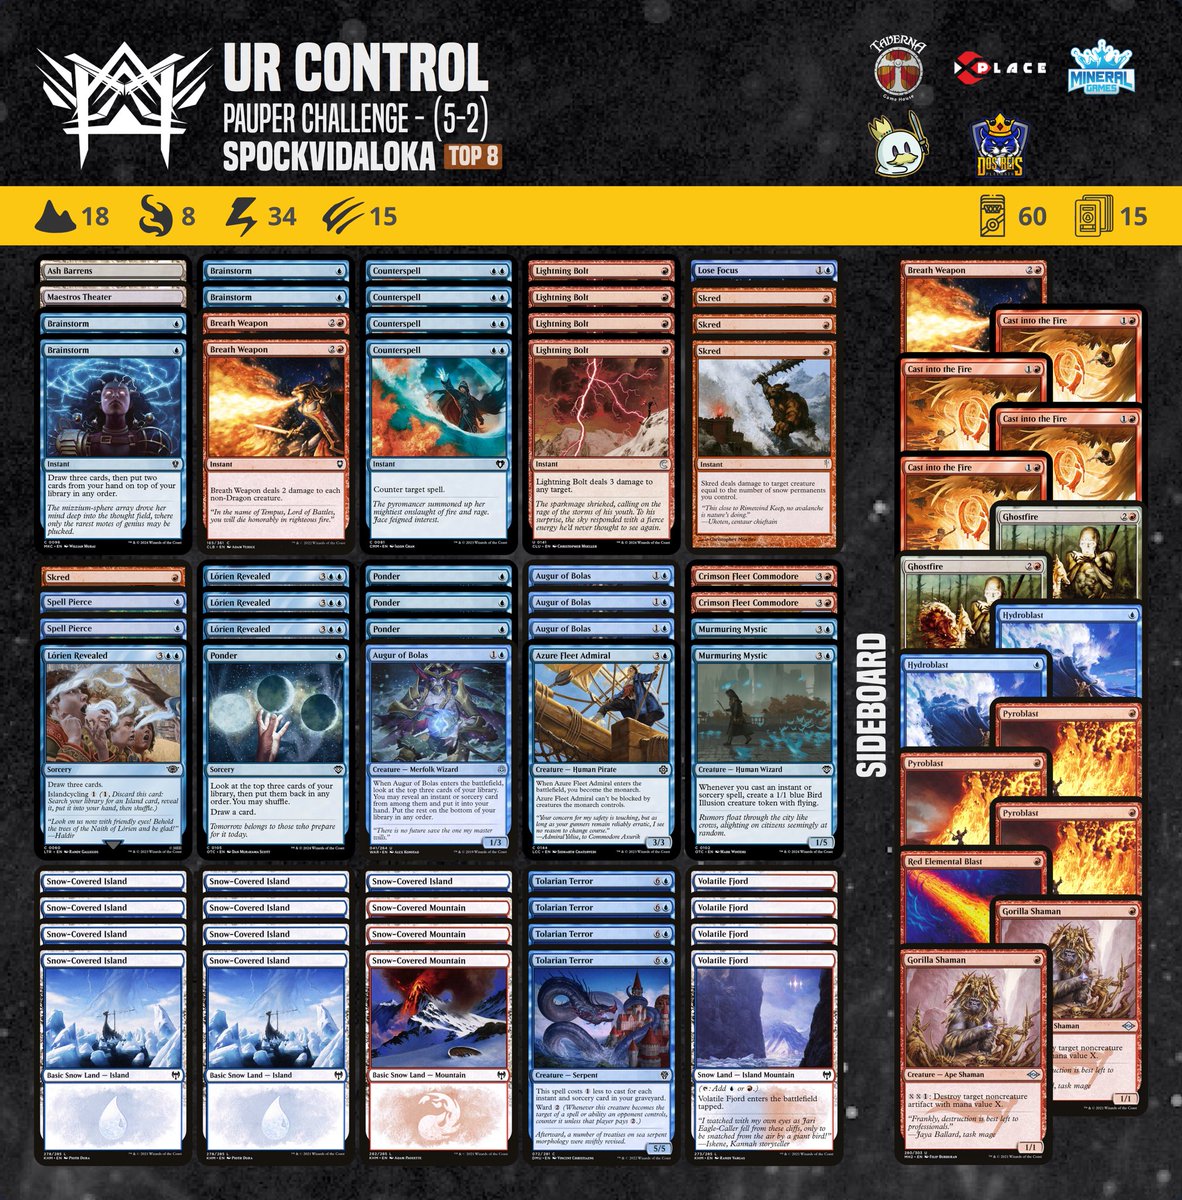 Our athlete @Vini_Spock achieved a 5-2 record in the Pauper Challenge tournament with this UR Control deck list.

#pauper  #magic #mtgcommon #metagamepauper #mtgpauper #magicthegathering #wizardsofthecoast 

@PauperDecklists @fireshoes